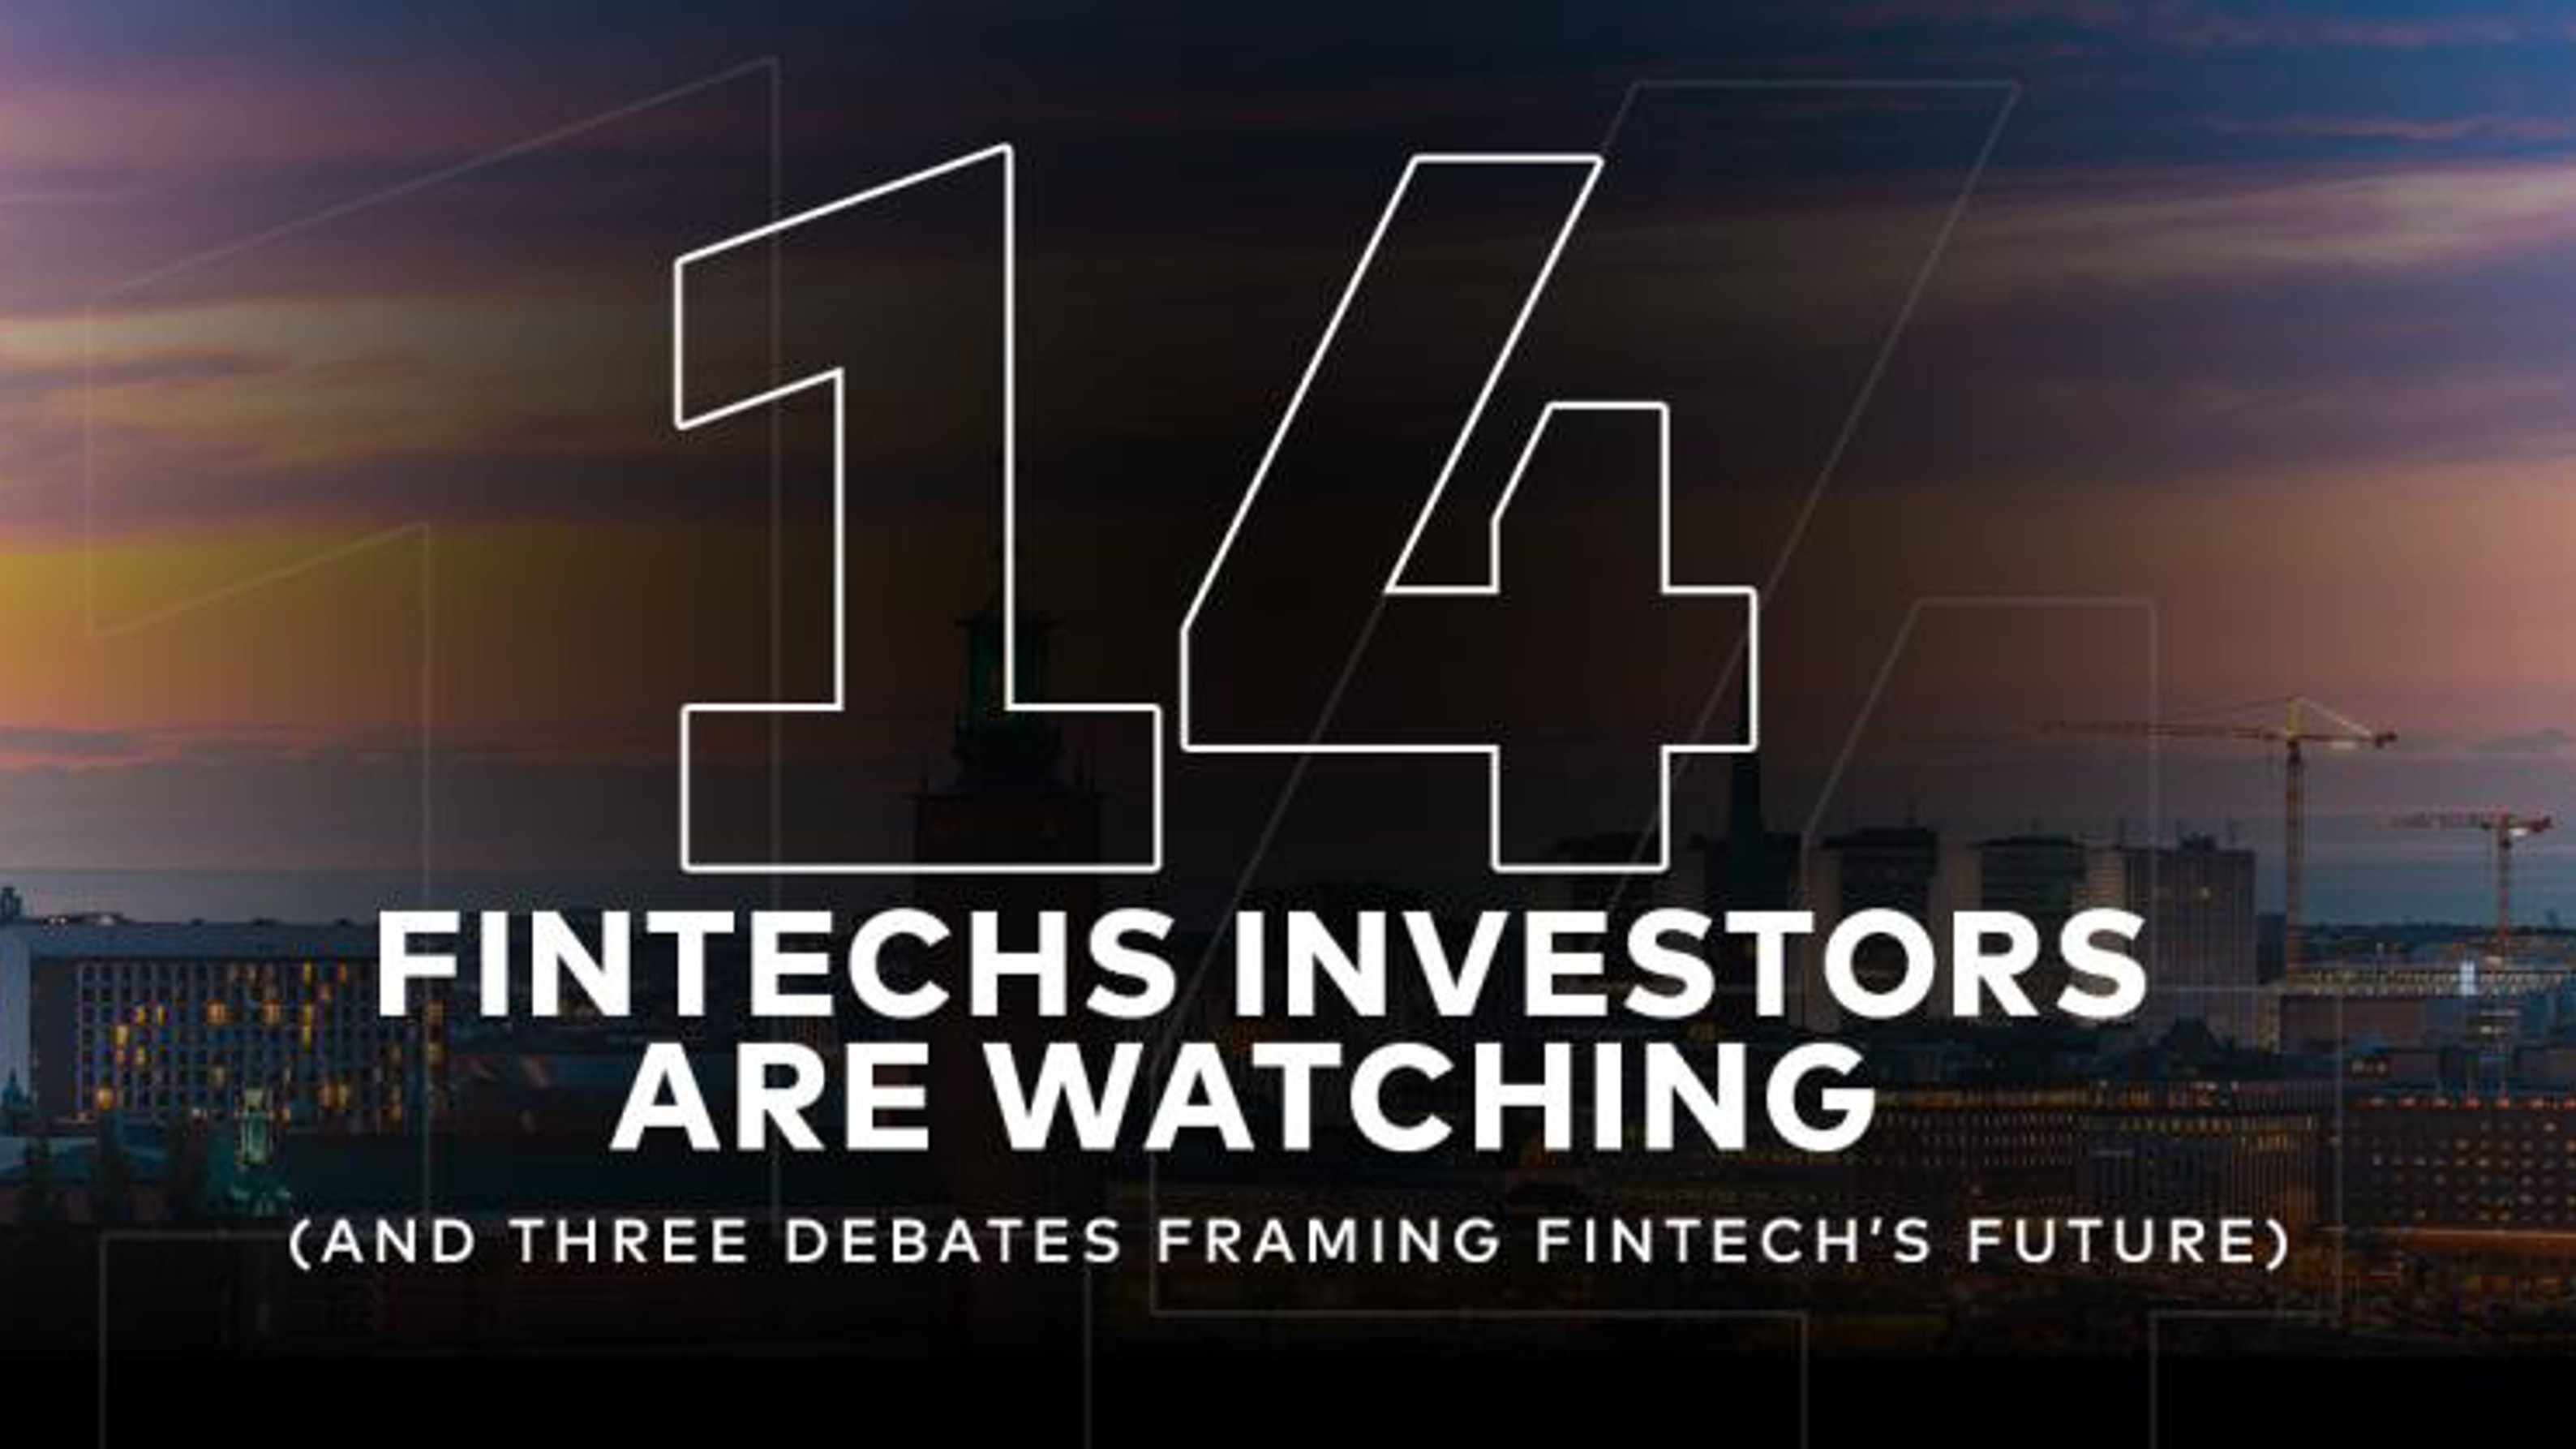 14 Fintechs Investors Are Watching (And Three Debates Framing Fintech’S Future)